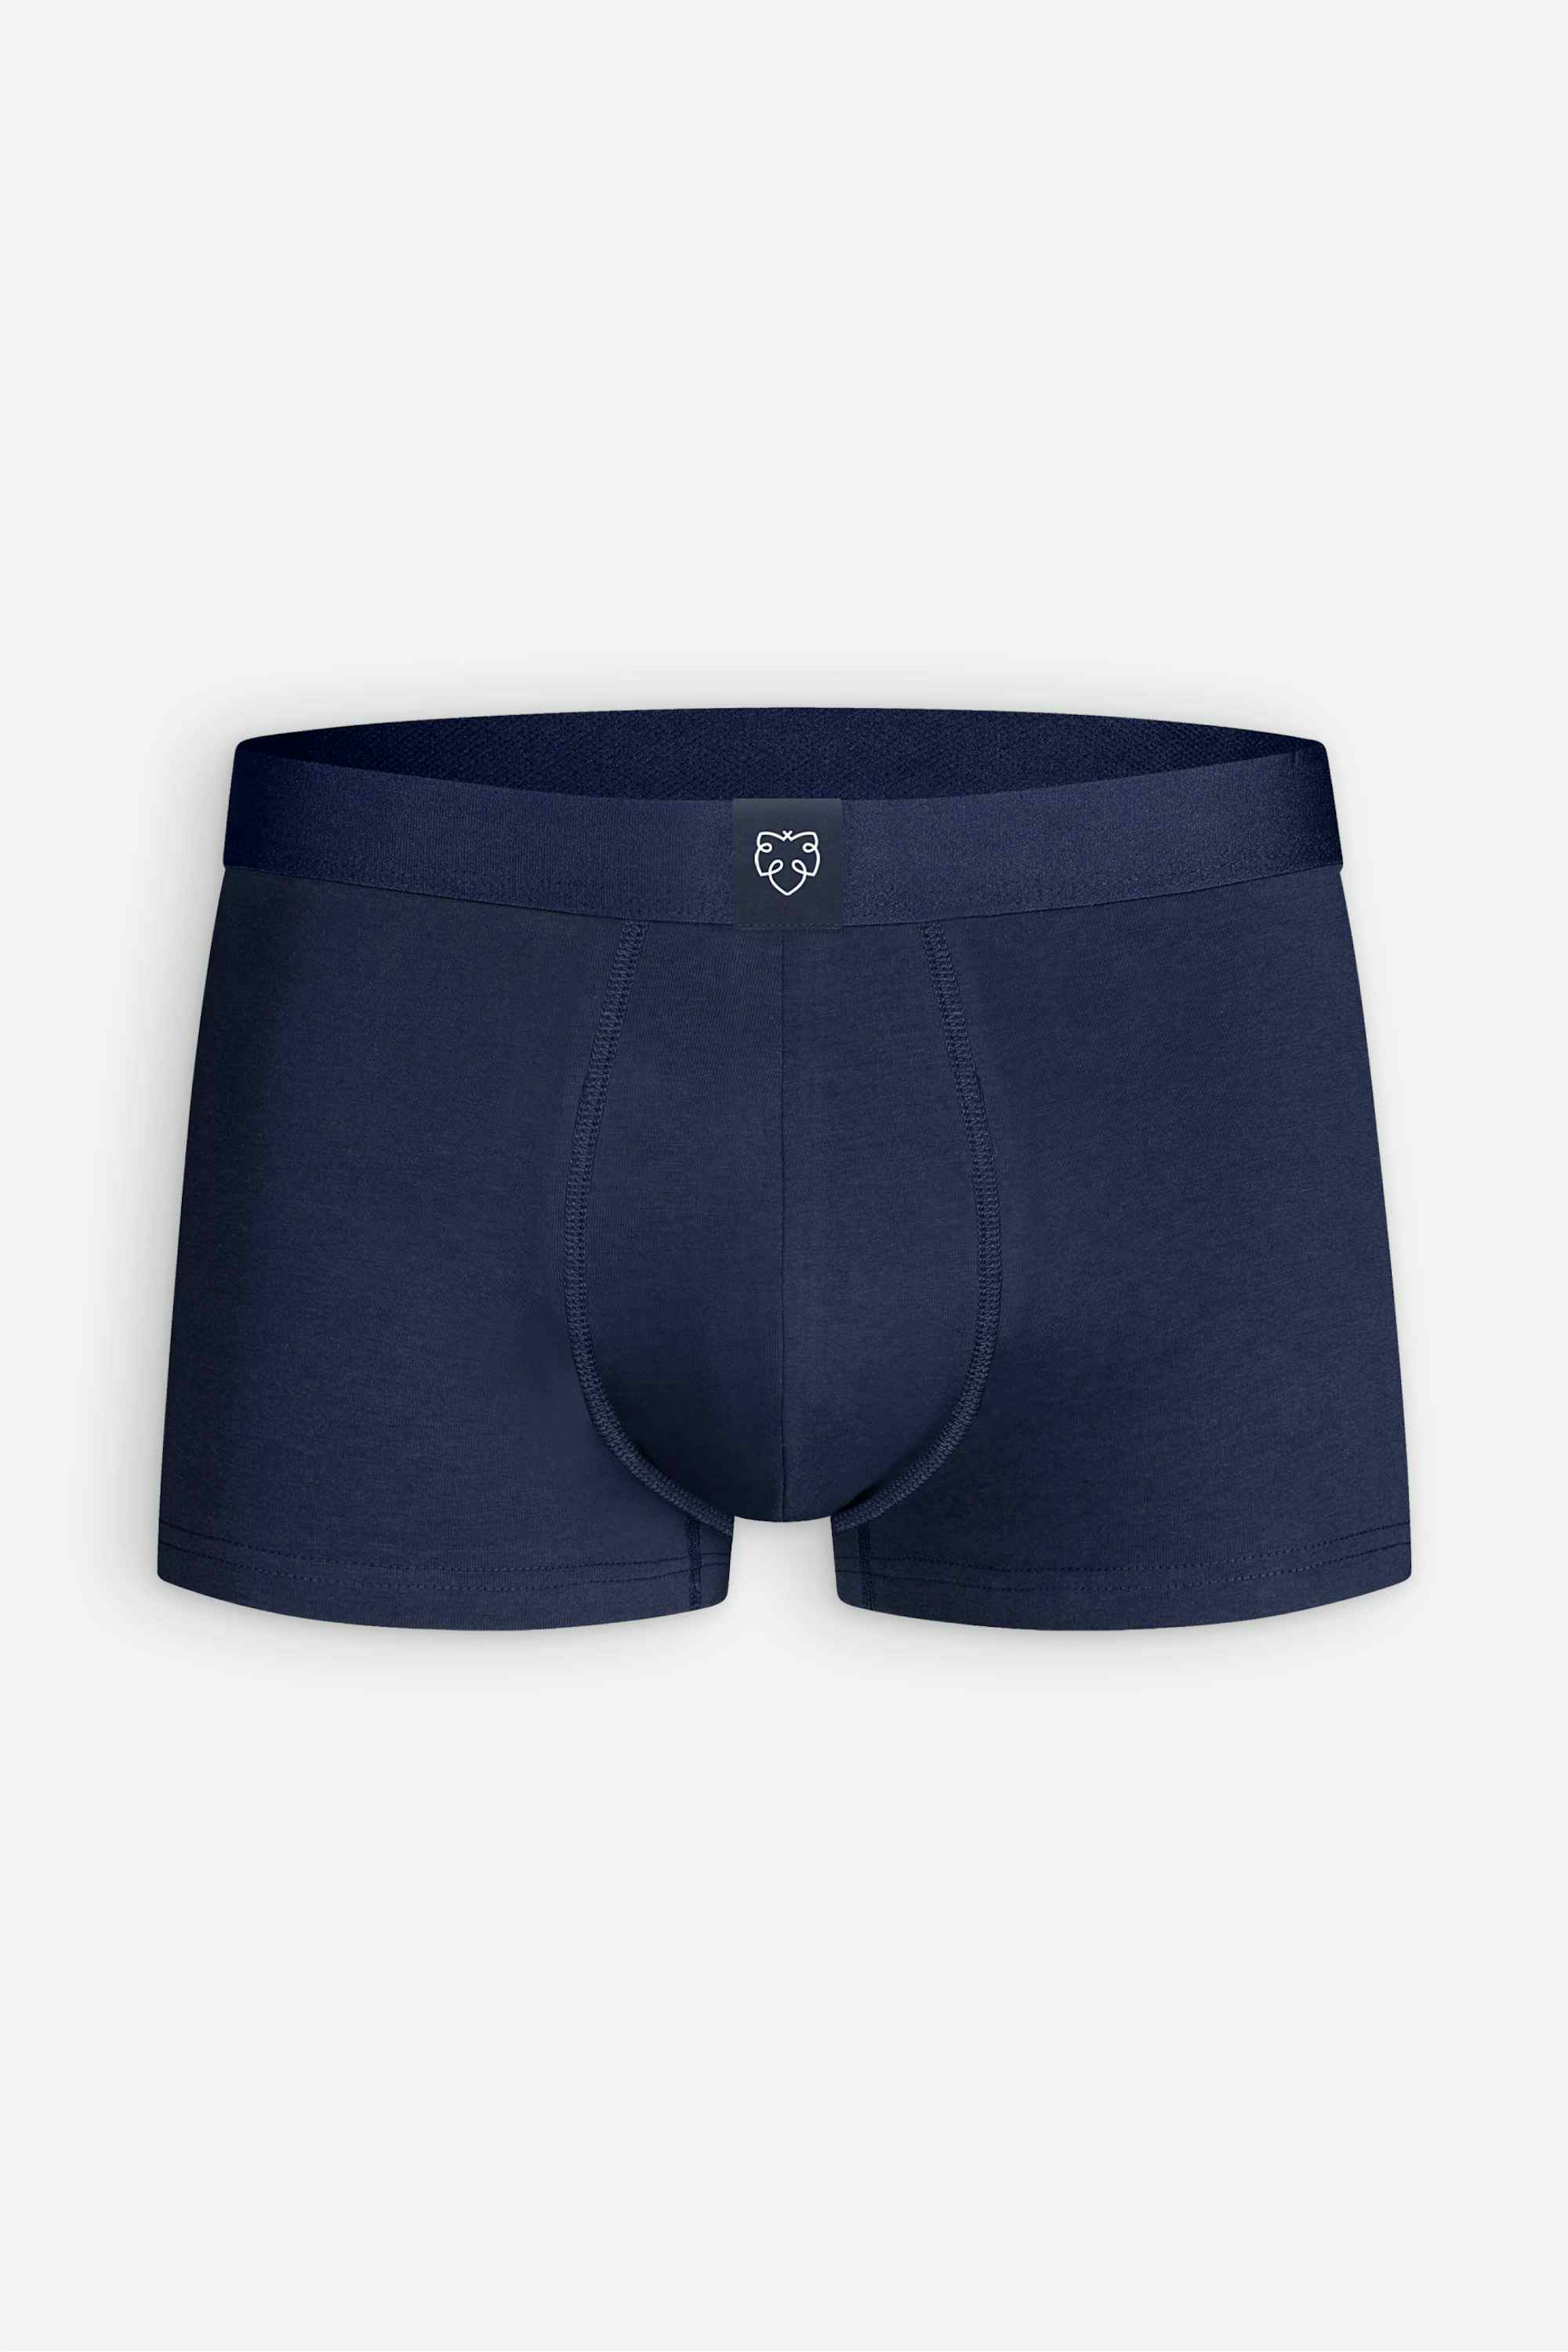 Solid Navy Trunks